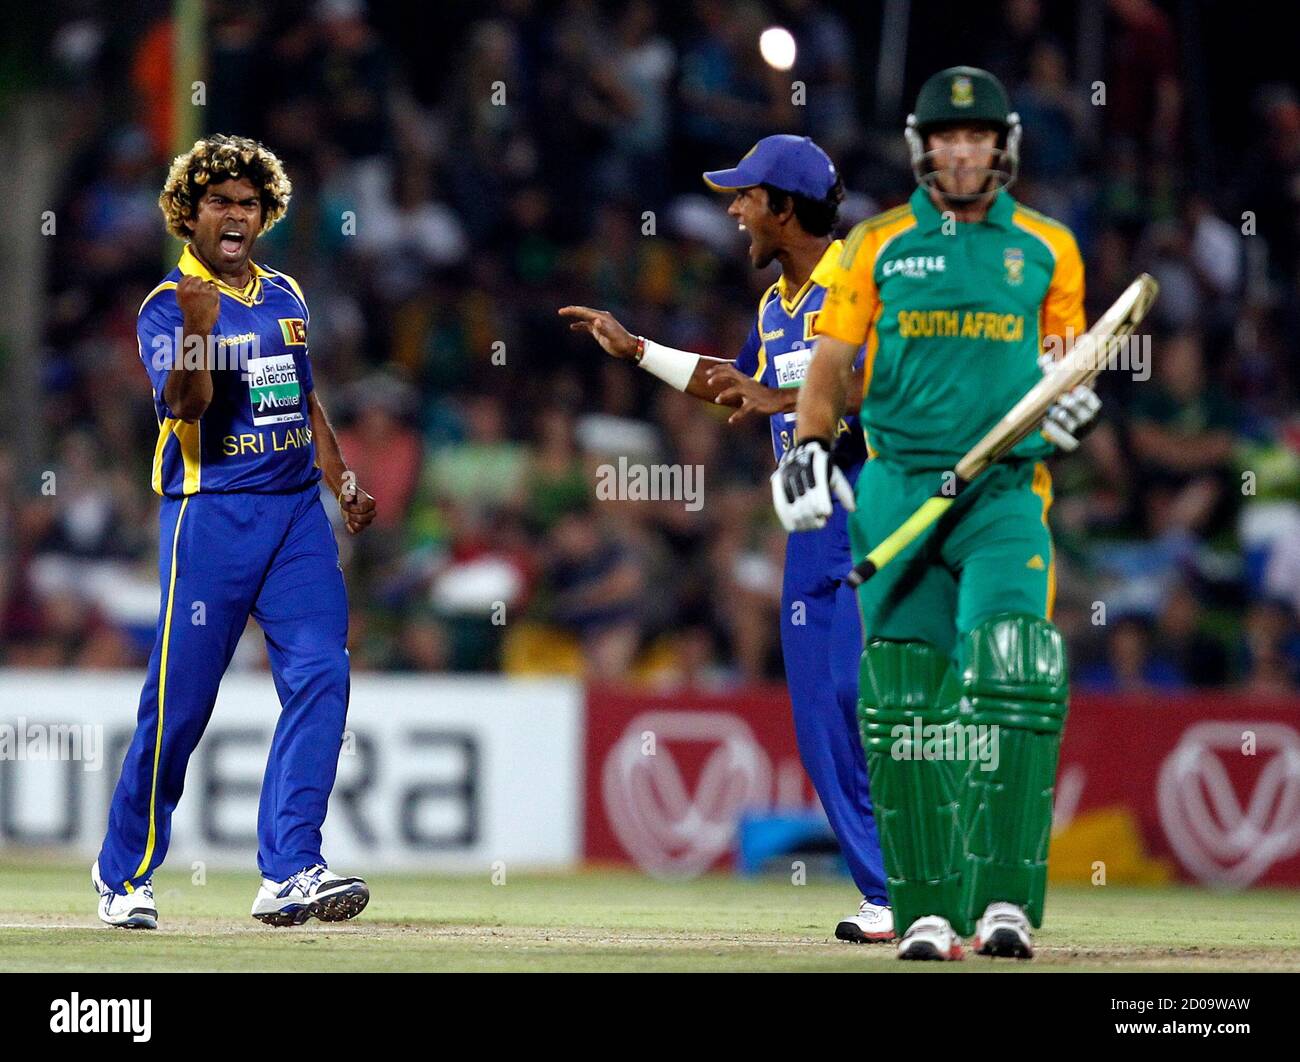 Sri Lanka's Lasith Malinga (L) celebrates with Dinesh Chandimal after bowling out South Africa's Colin Ingram (R) during their third one-day international cricket match in Bloemfontein January 17, 2012. REUTERS/Siphiwe Sibeko (SOUTH AFRICA - Tags: SPORT CRICKET) Stock Photo